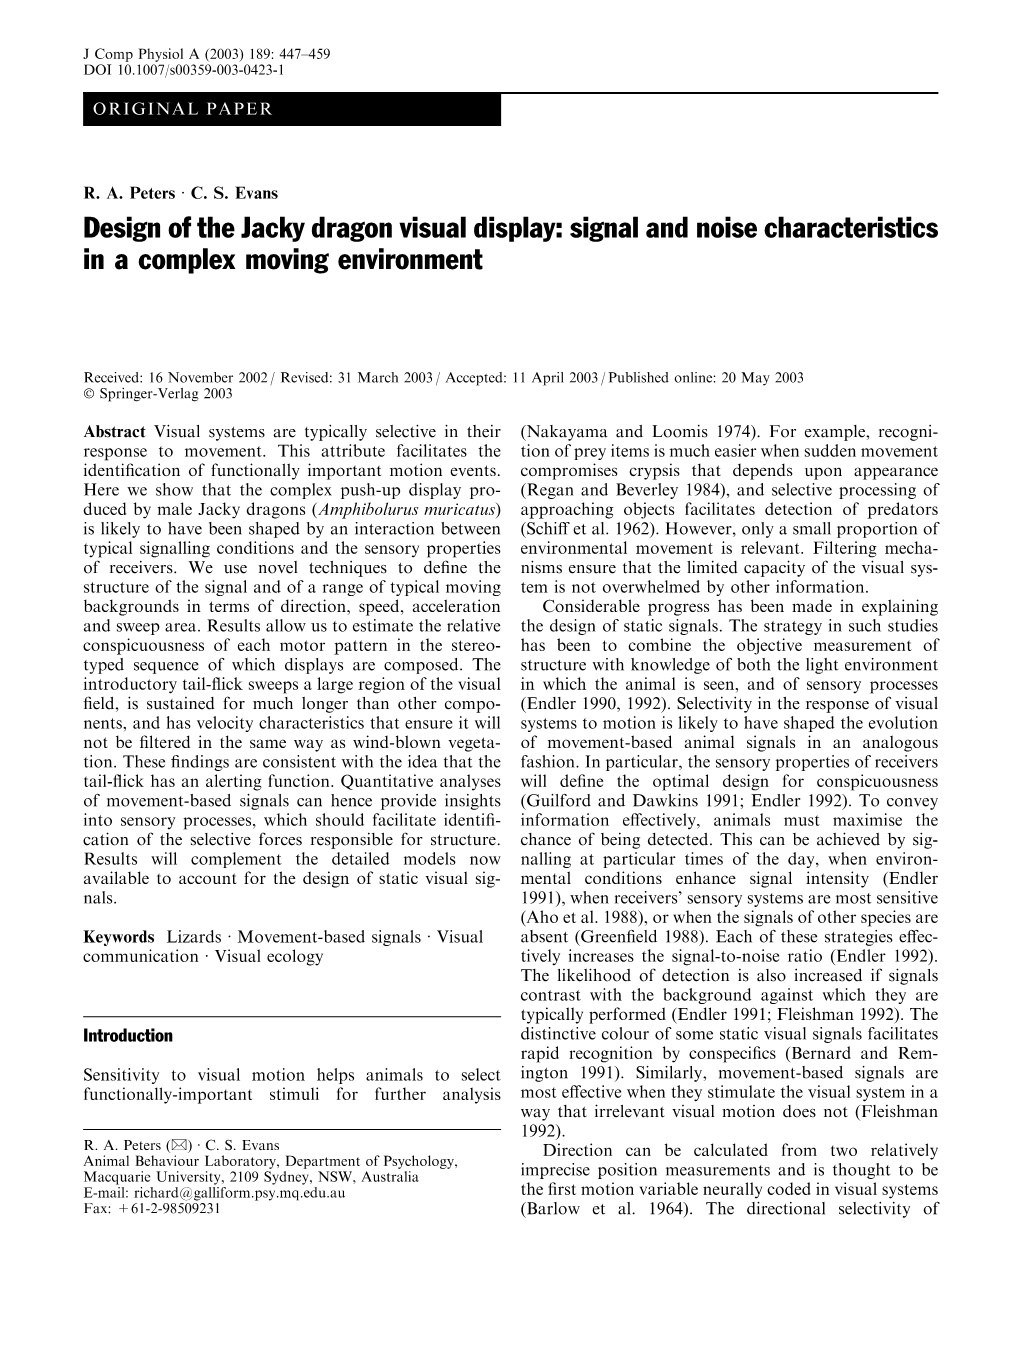 Design of the Jacky Dragon Visual Display: Signal and Noise Characteristics in a Complex Moving Environment